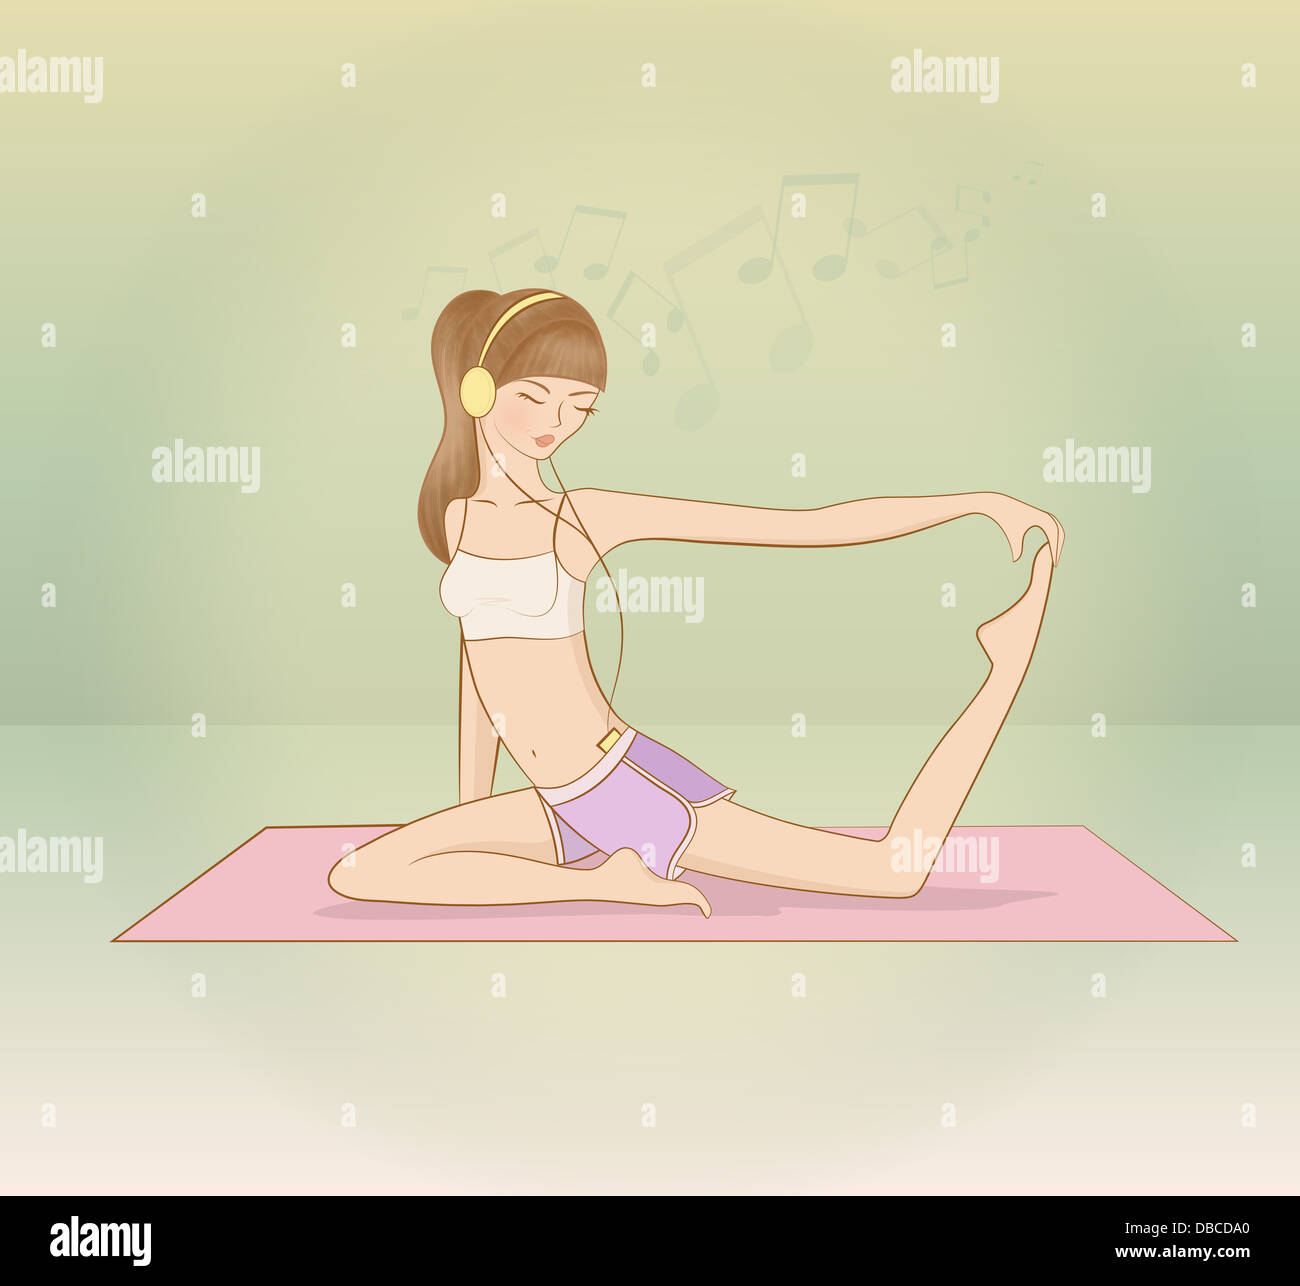 Illustration of young woman performing yoga on mat Stock Photo